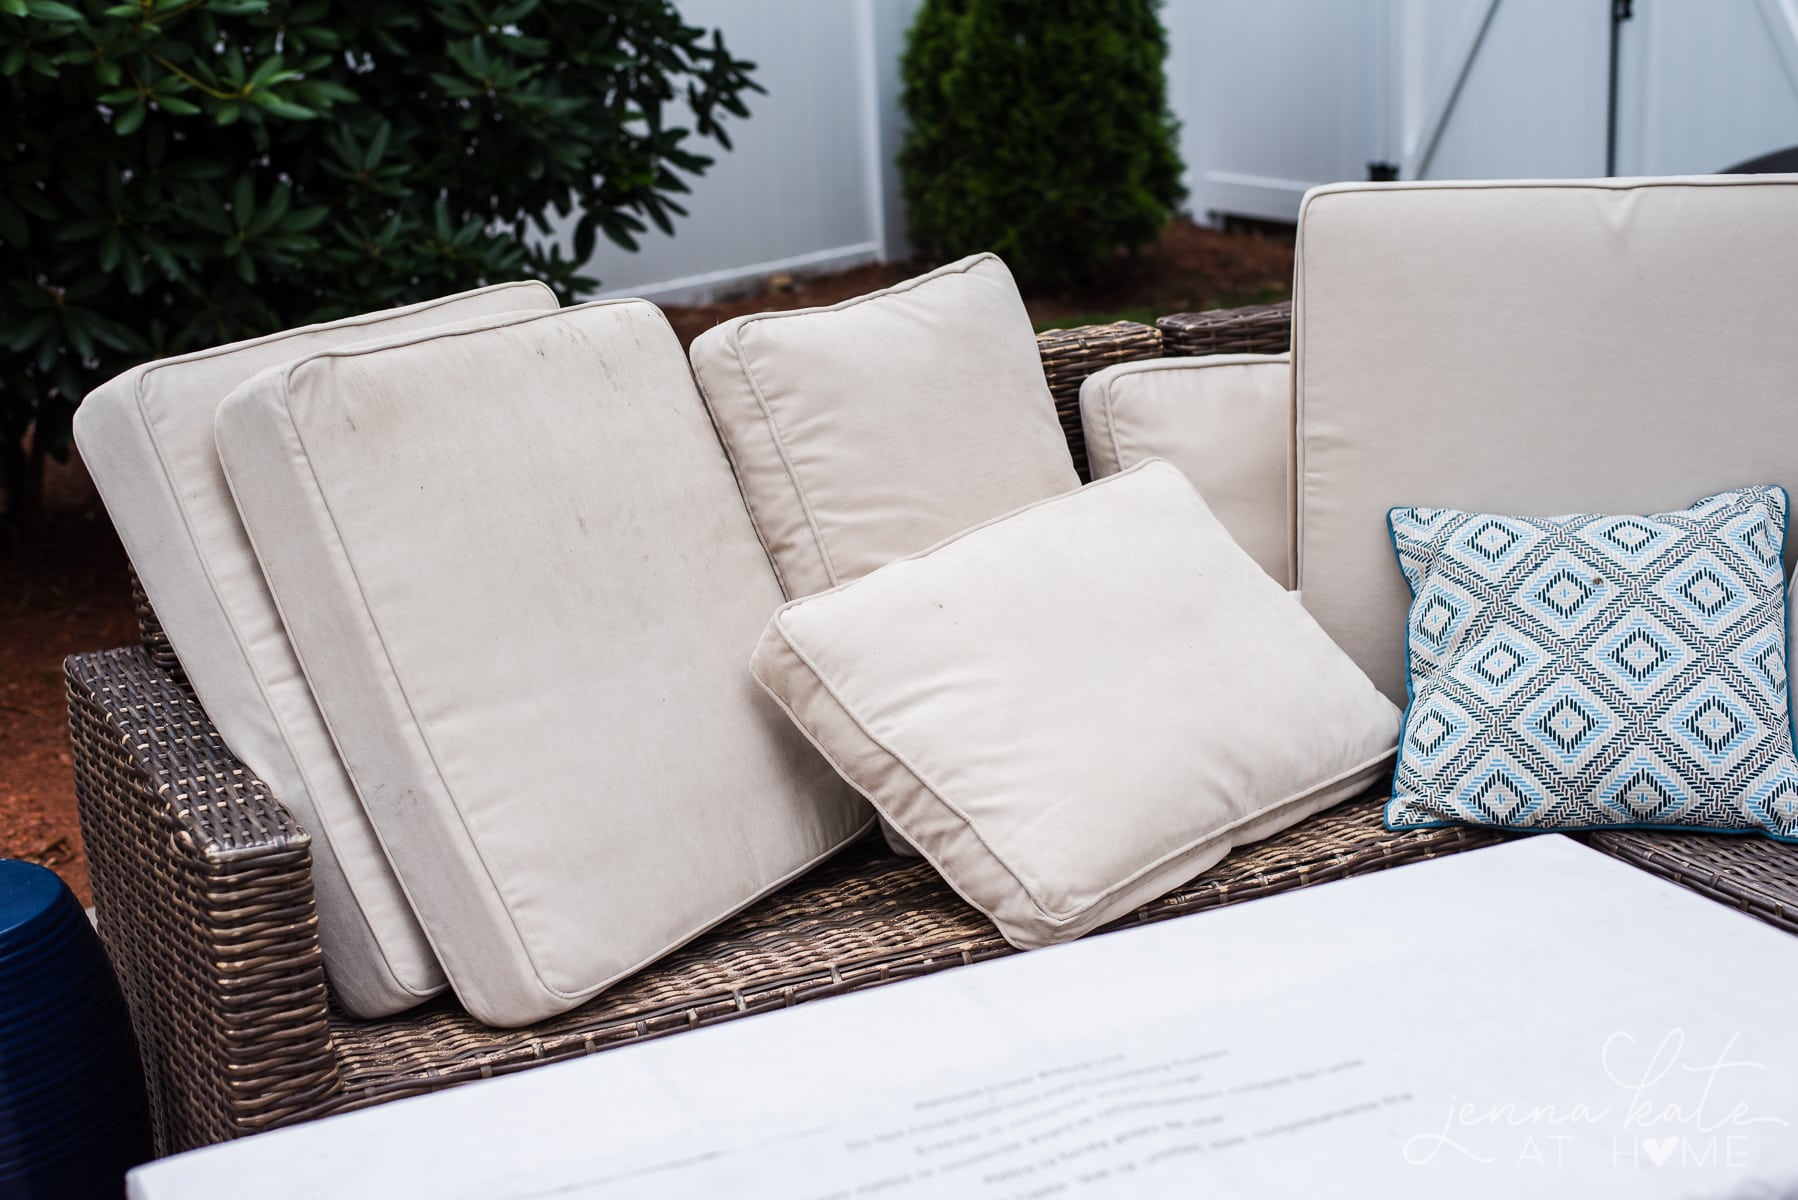 How To Clean Outdoor Cushions Jenna, Pier One Patio Cushion Covers